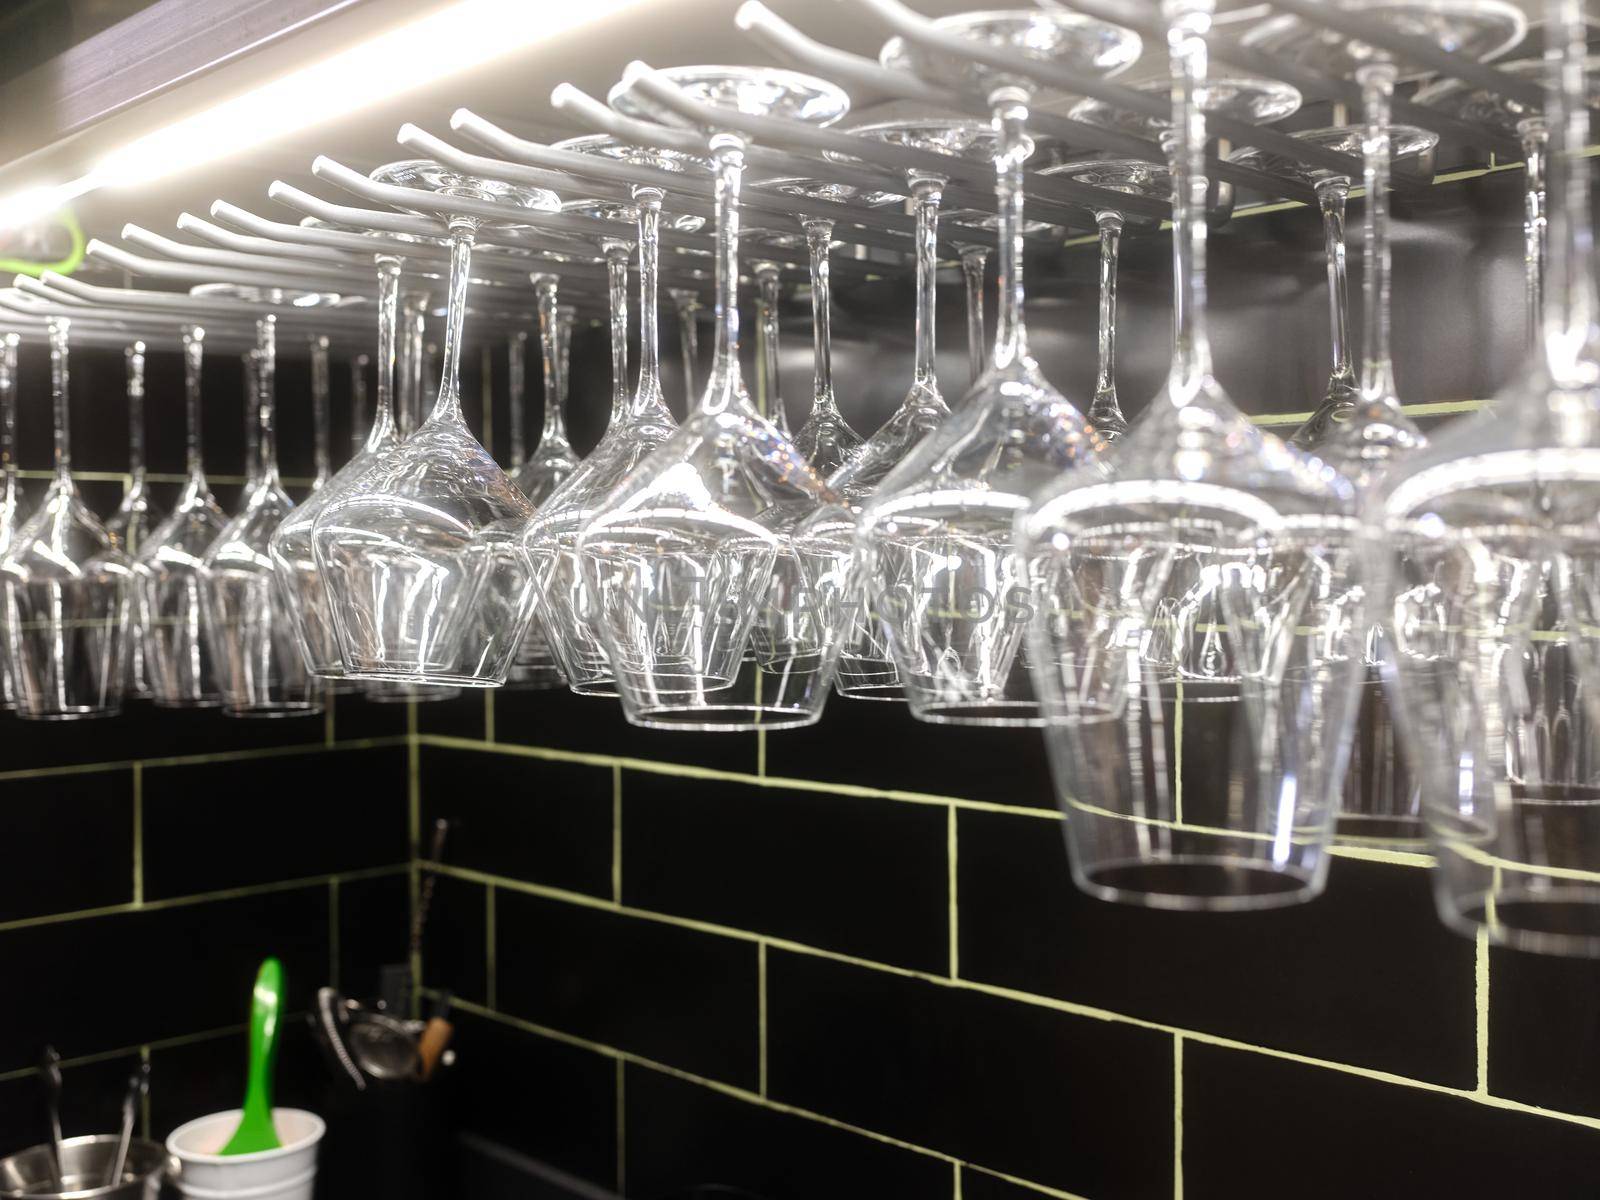 Illuminated clean set of wine glasses hanging from a rack in a restaurant